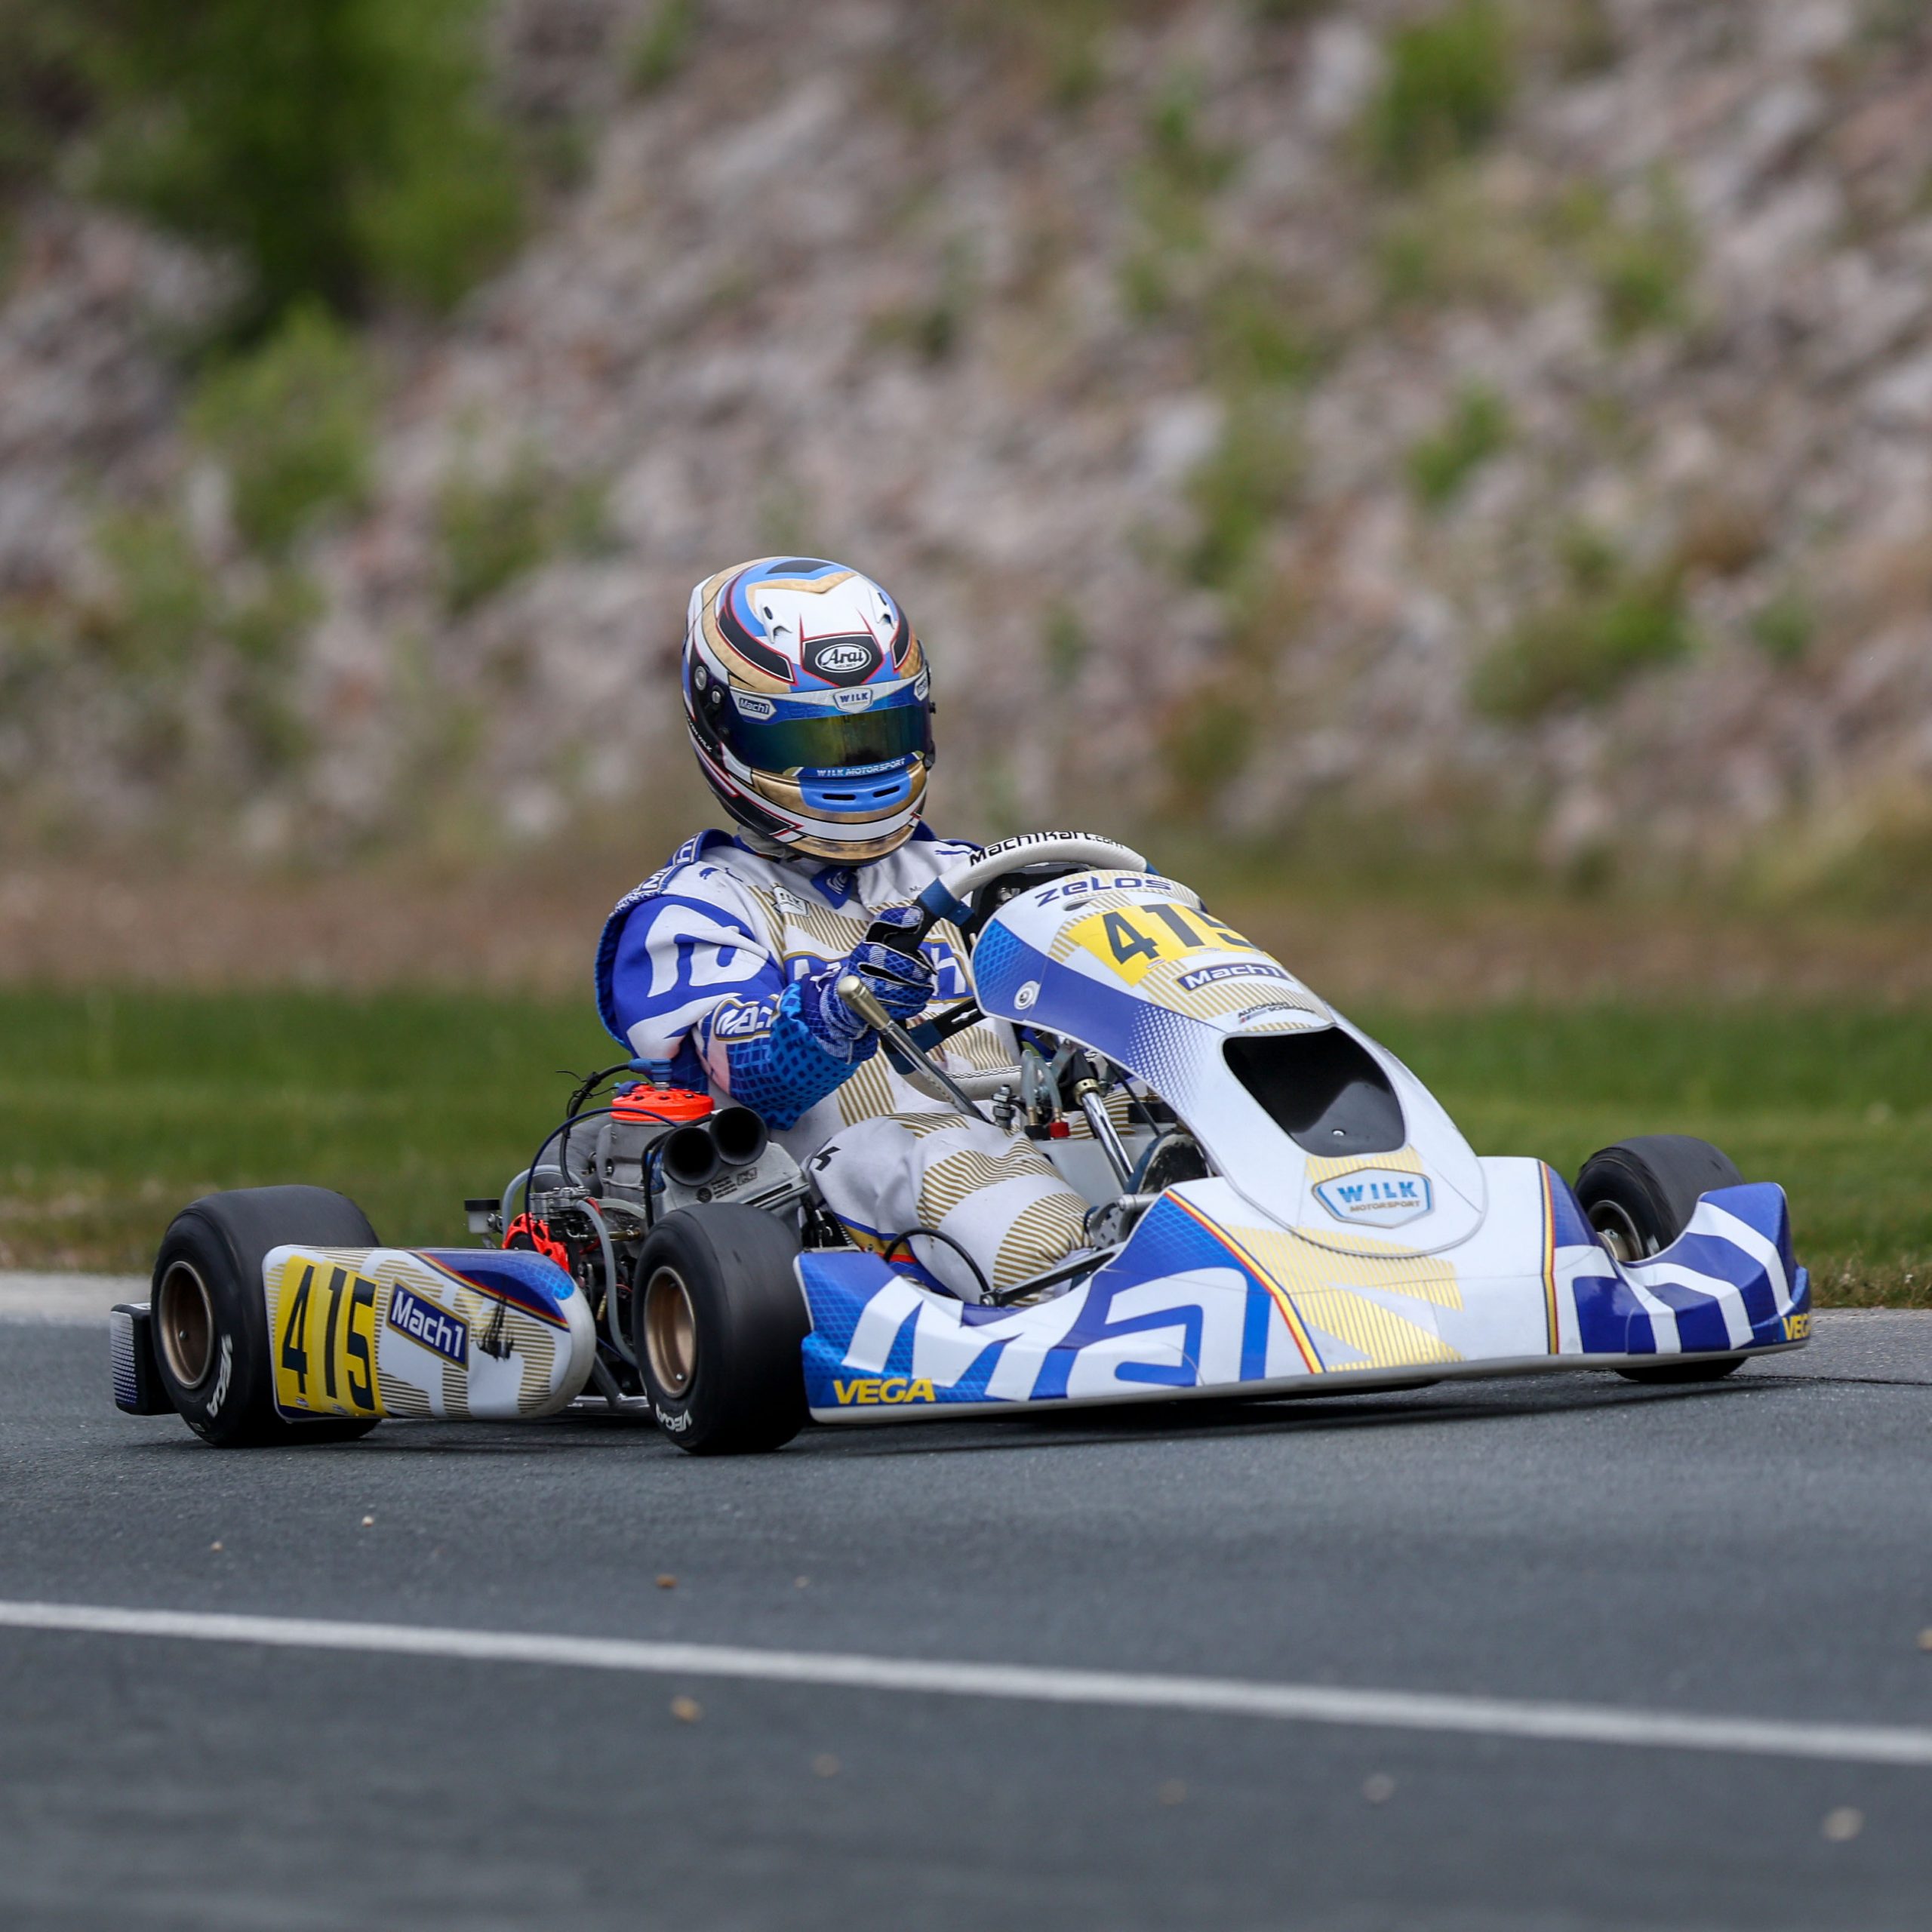 Mach1 Kart narrowly missed out on cup positions at the start of the DKM